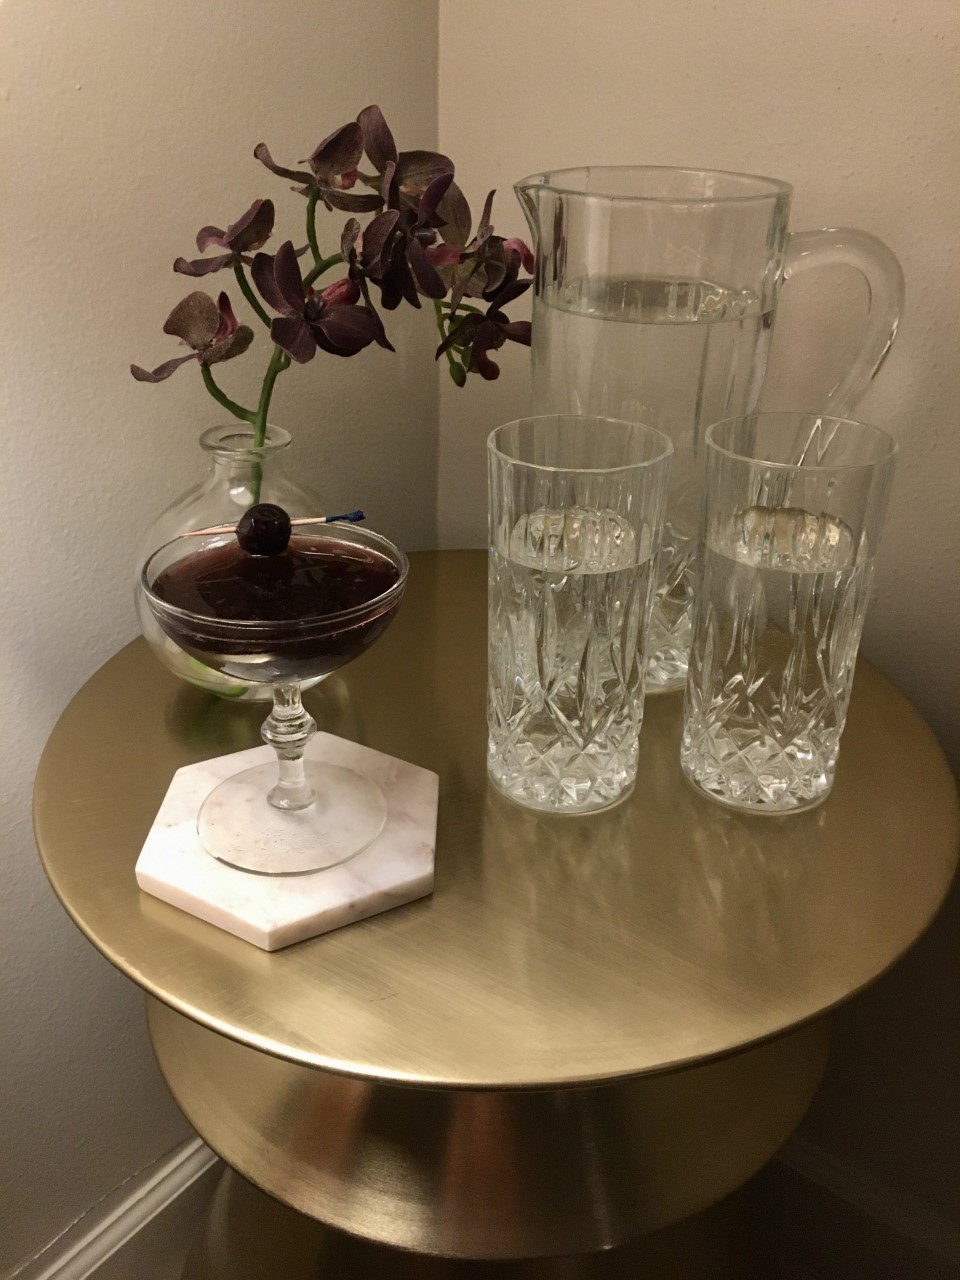 The Aviation cocktail